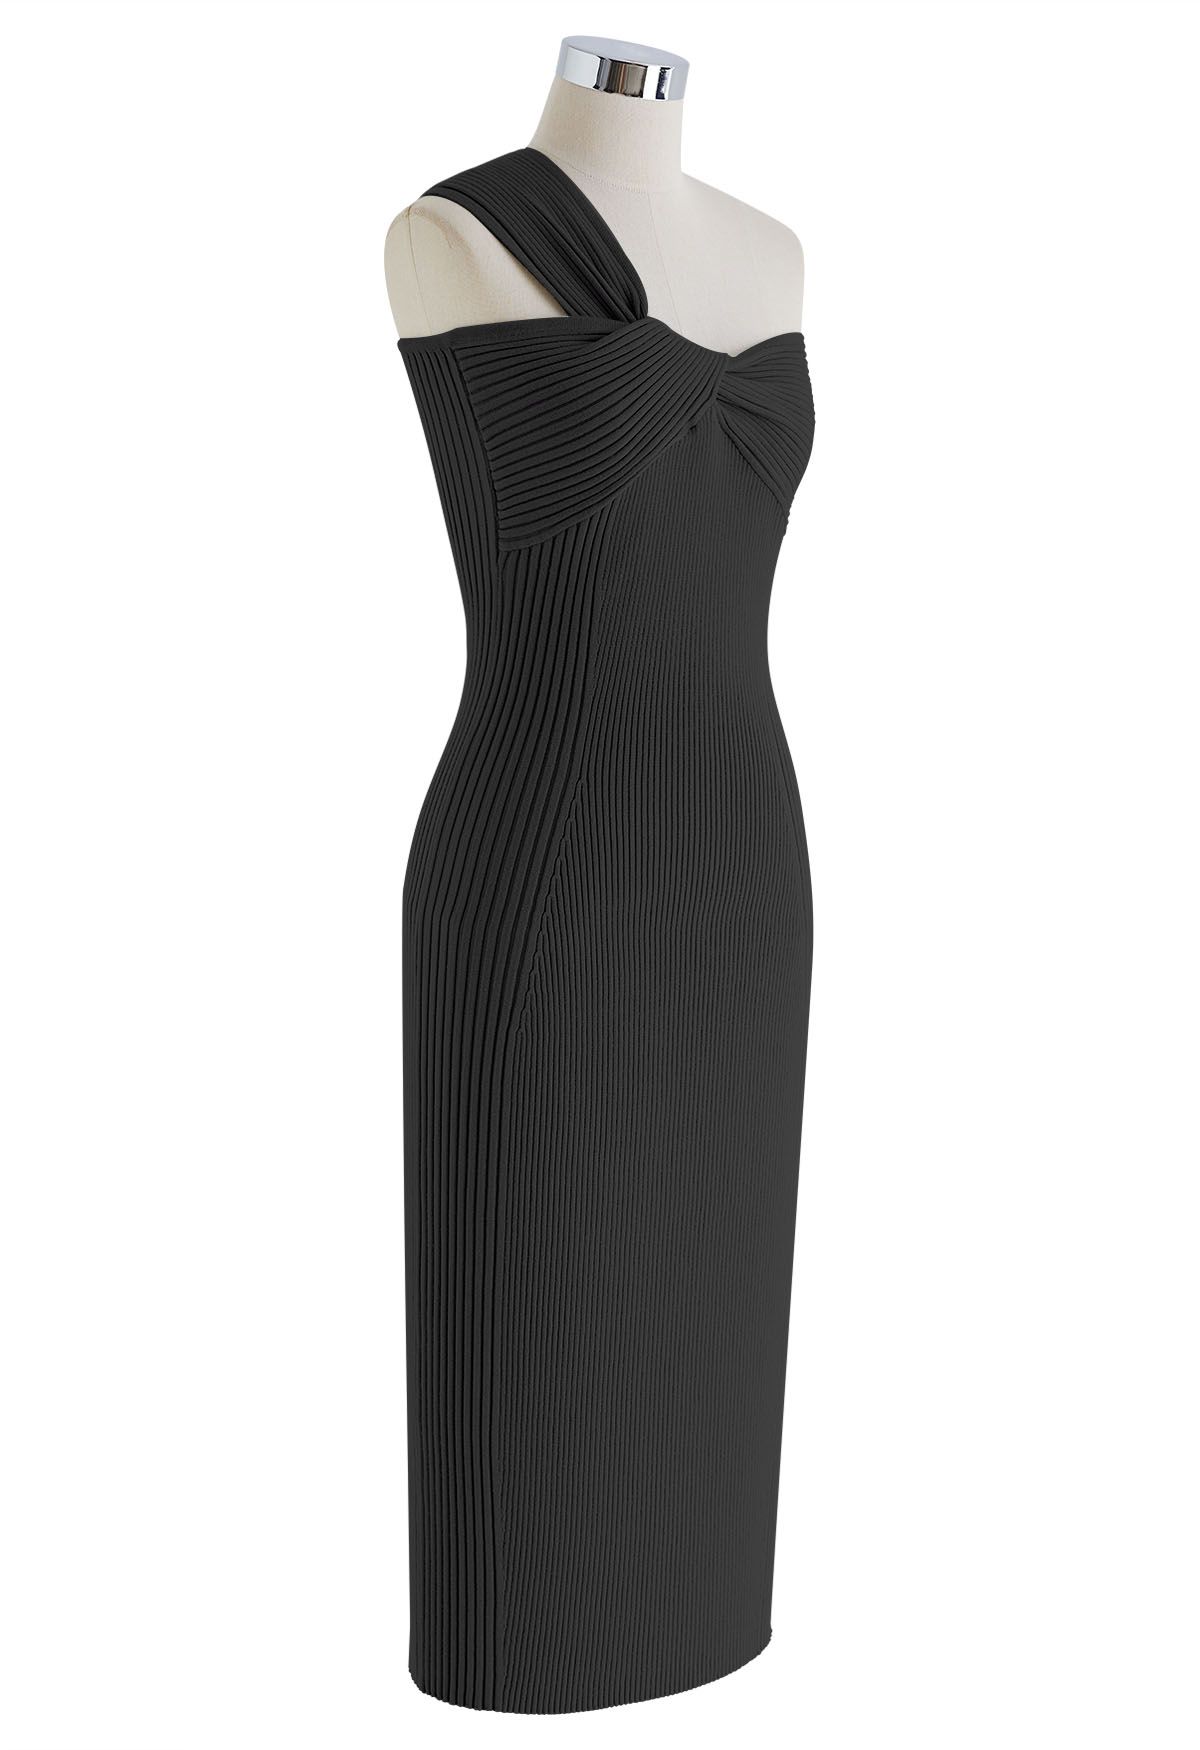 One-Shoulder Knotted Bodycon Knit Dress in Black - Retro, Indie and ...